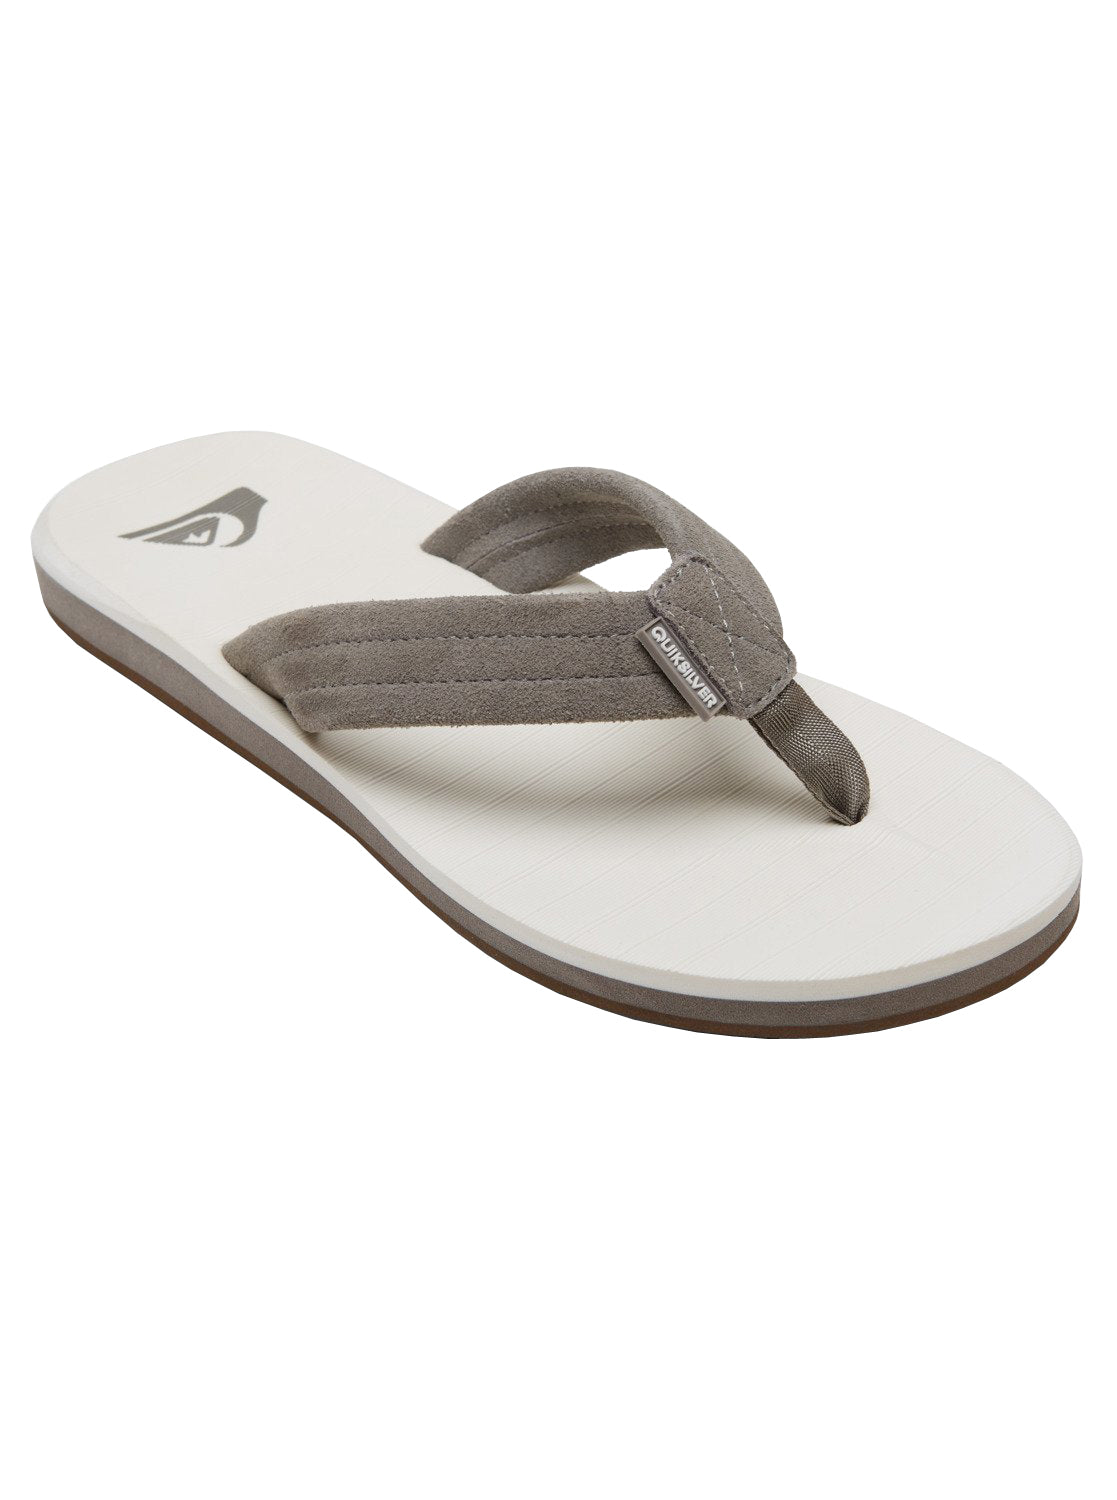 Quiksilver Carver Suede Mens Sandal XSWS-Grey-White-Grey 6